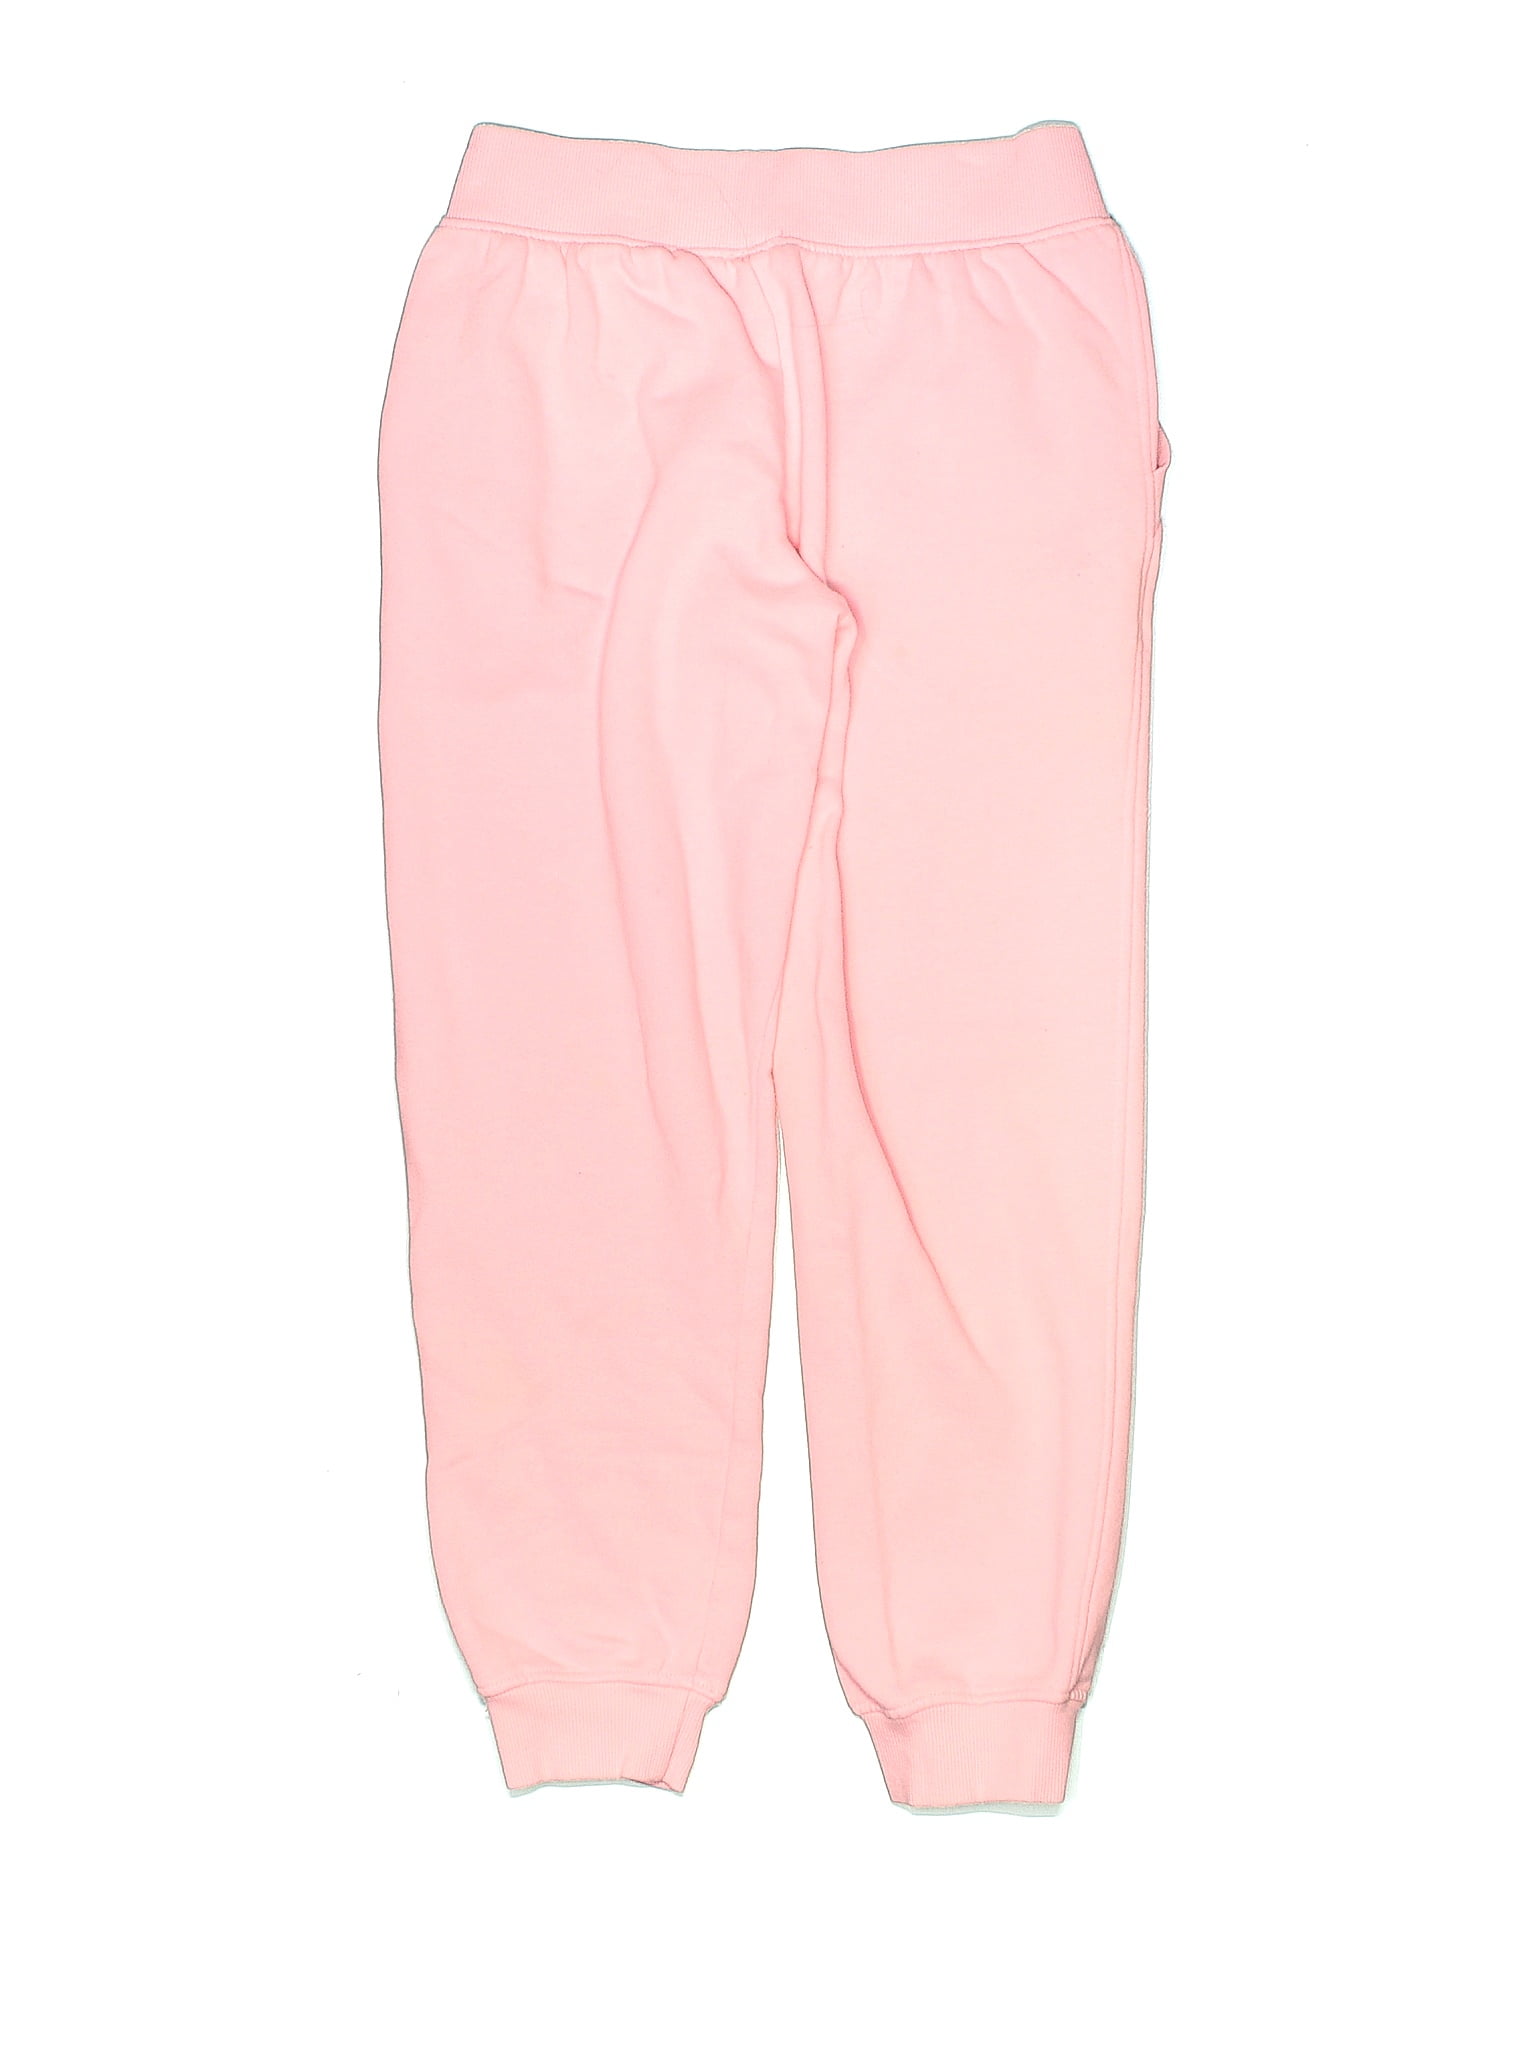 Hollister Solid Pink Sweatpants Size XS - 72% off